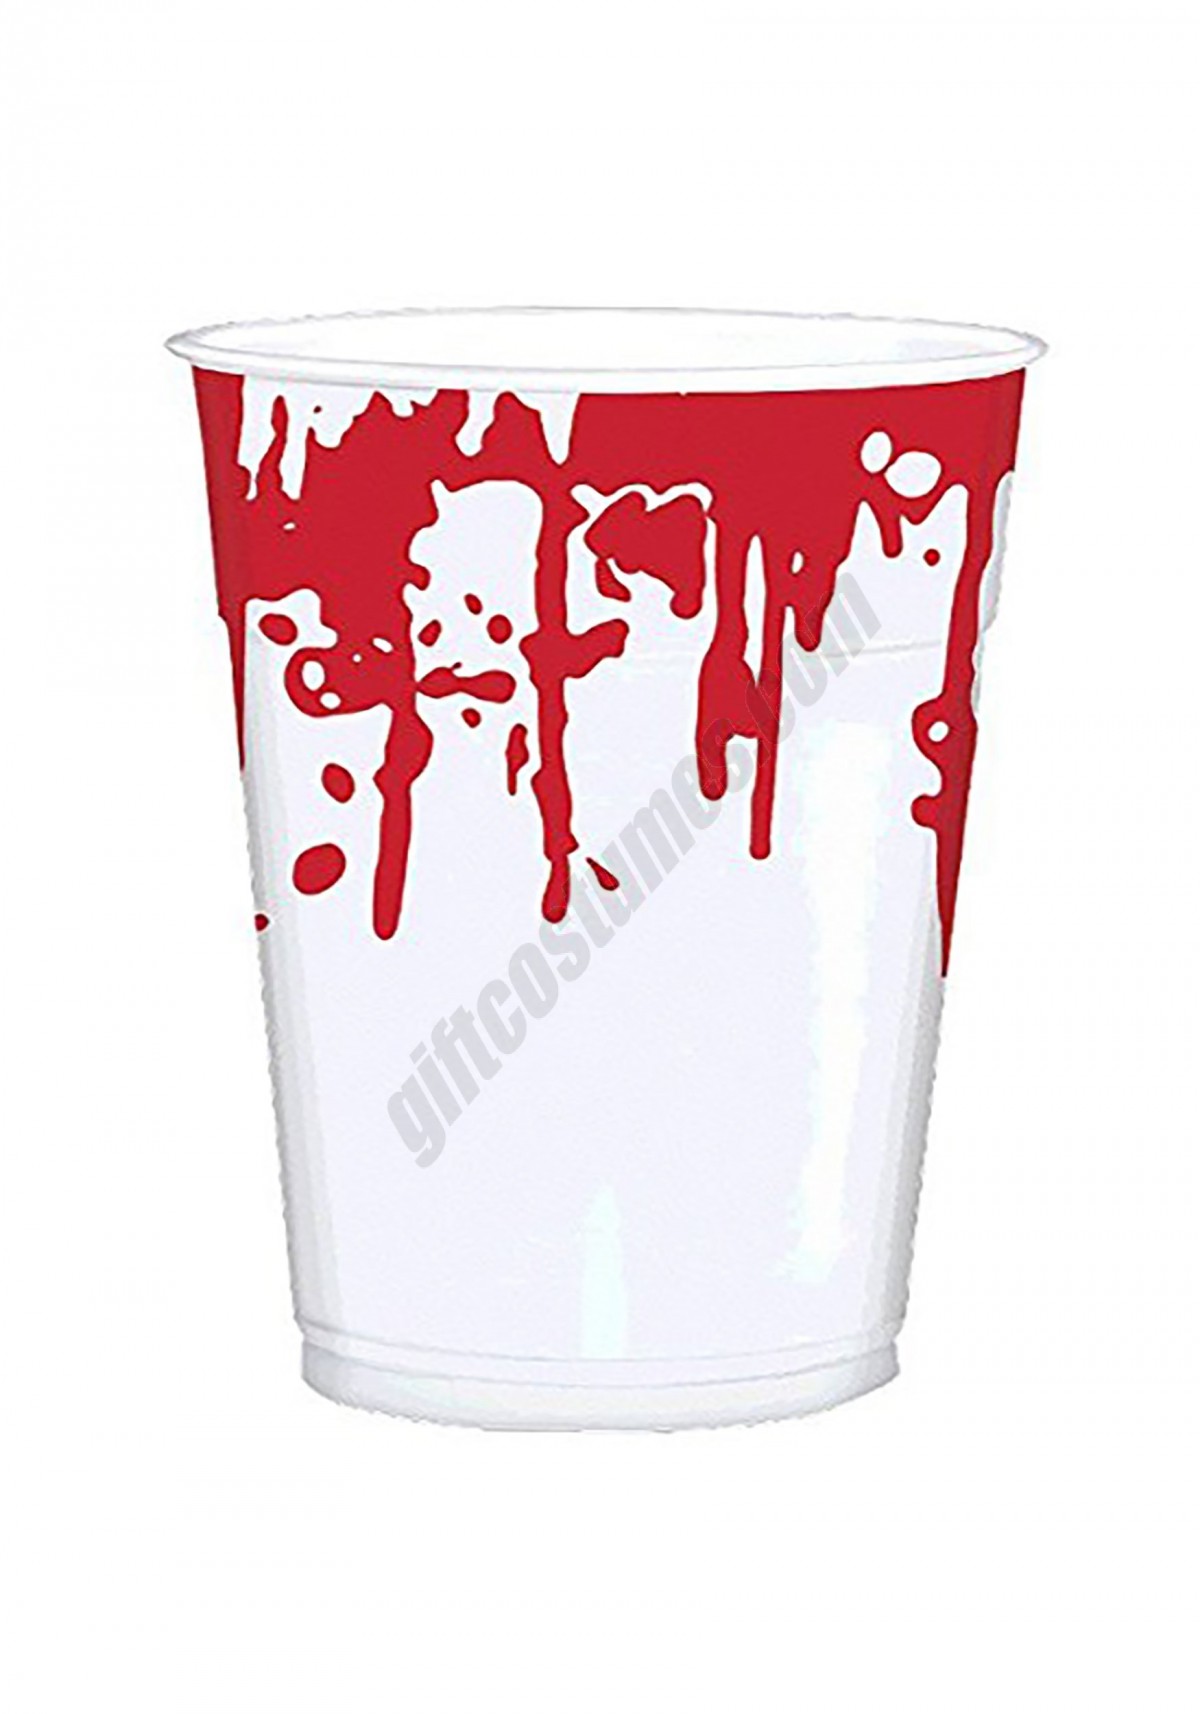 25 Ct. Halloween Bloody Hand Prints 16 oz. Party Cups Promotions - -0